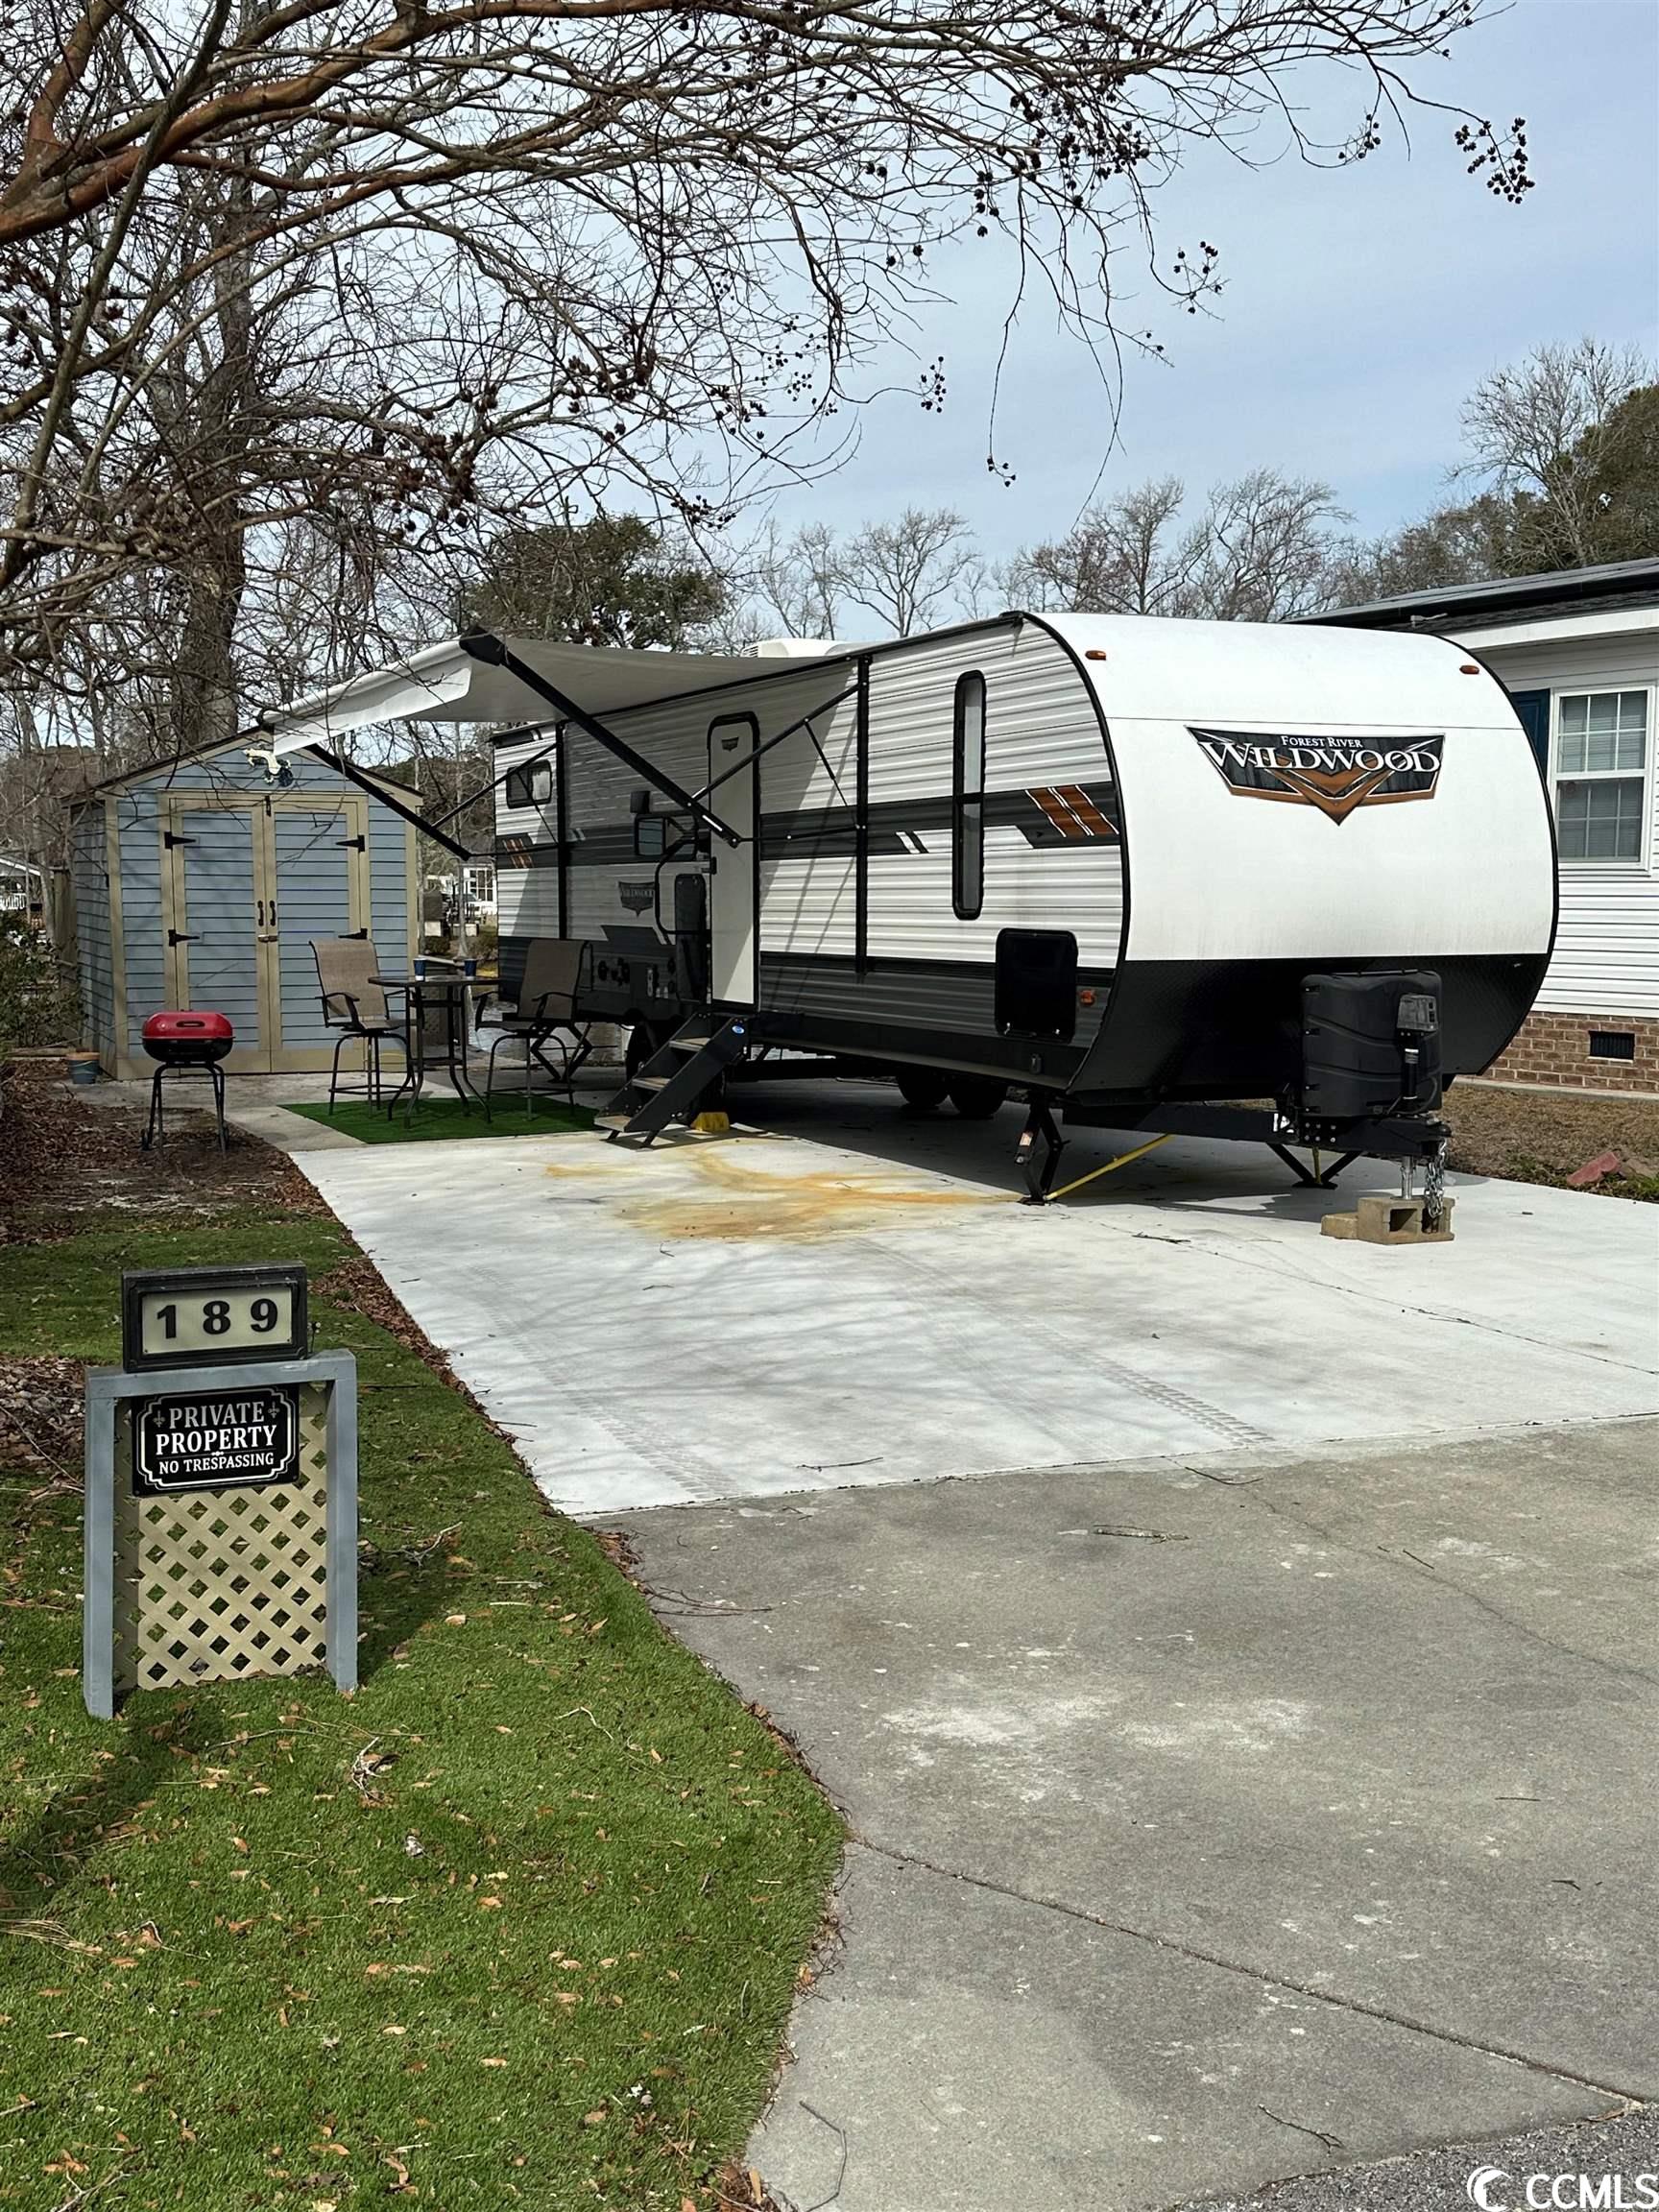 located in myrtle beach rv resort. this lot has a custom-built storage building with a built on private deck facing the pond. this gated community has 2 pools, hot tub, children's pool, community center, basketball courts, playground, 2 ponds, pickle ball and a putt putt course.  the community allows long and short-term rentals and the low hoa includes water and sewer, cable/wi-fi, lawn maintenance and trash pickup. and don't forget you can golf cart ride to the beach. rv on lot can be purchased separately.